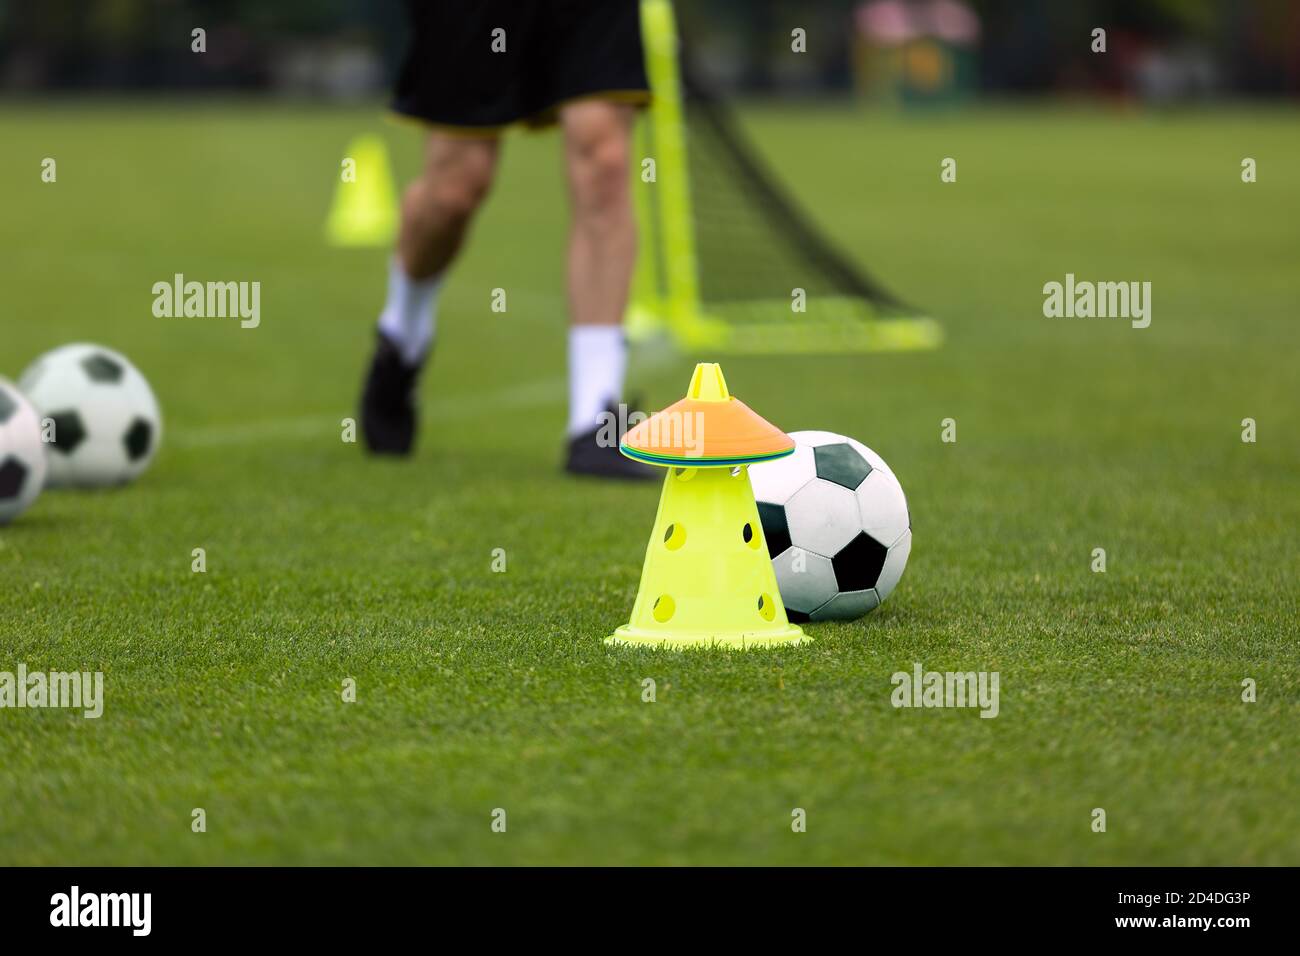 Adult Football Player On Training Unit Running Footballer On Practice Soccer Yellow Cone Training Markers And Soccer Ball In The Foreground Blurre Stock Photo Alamy